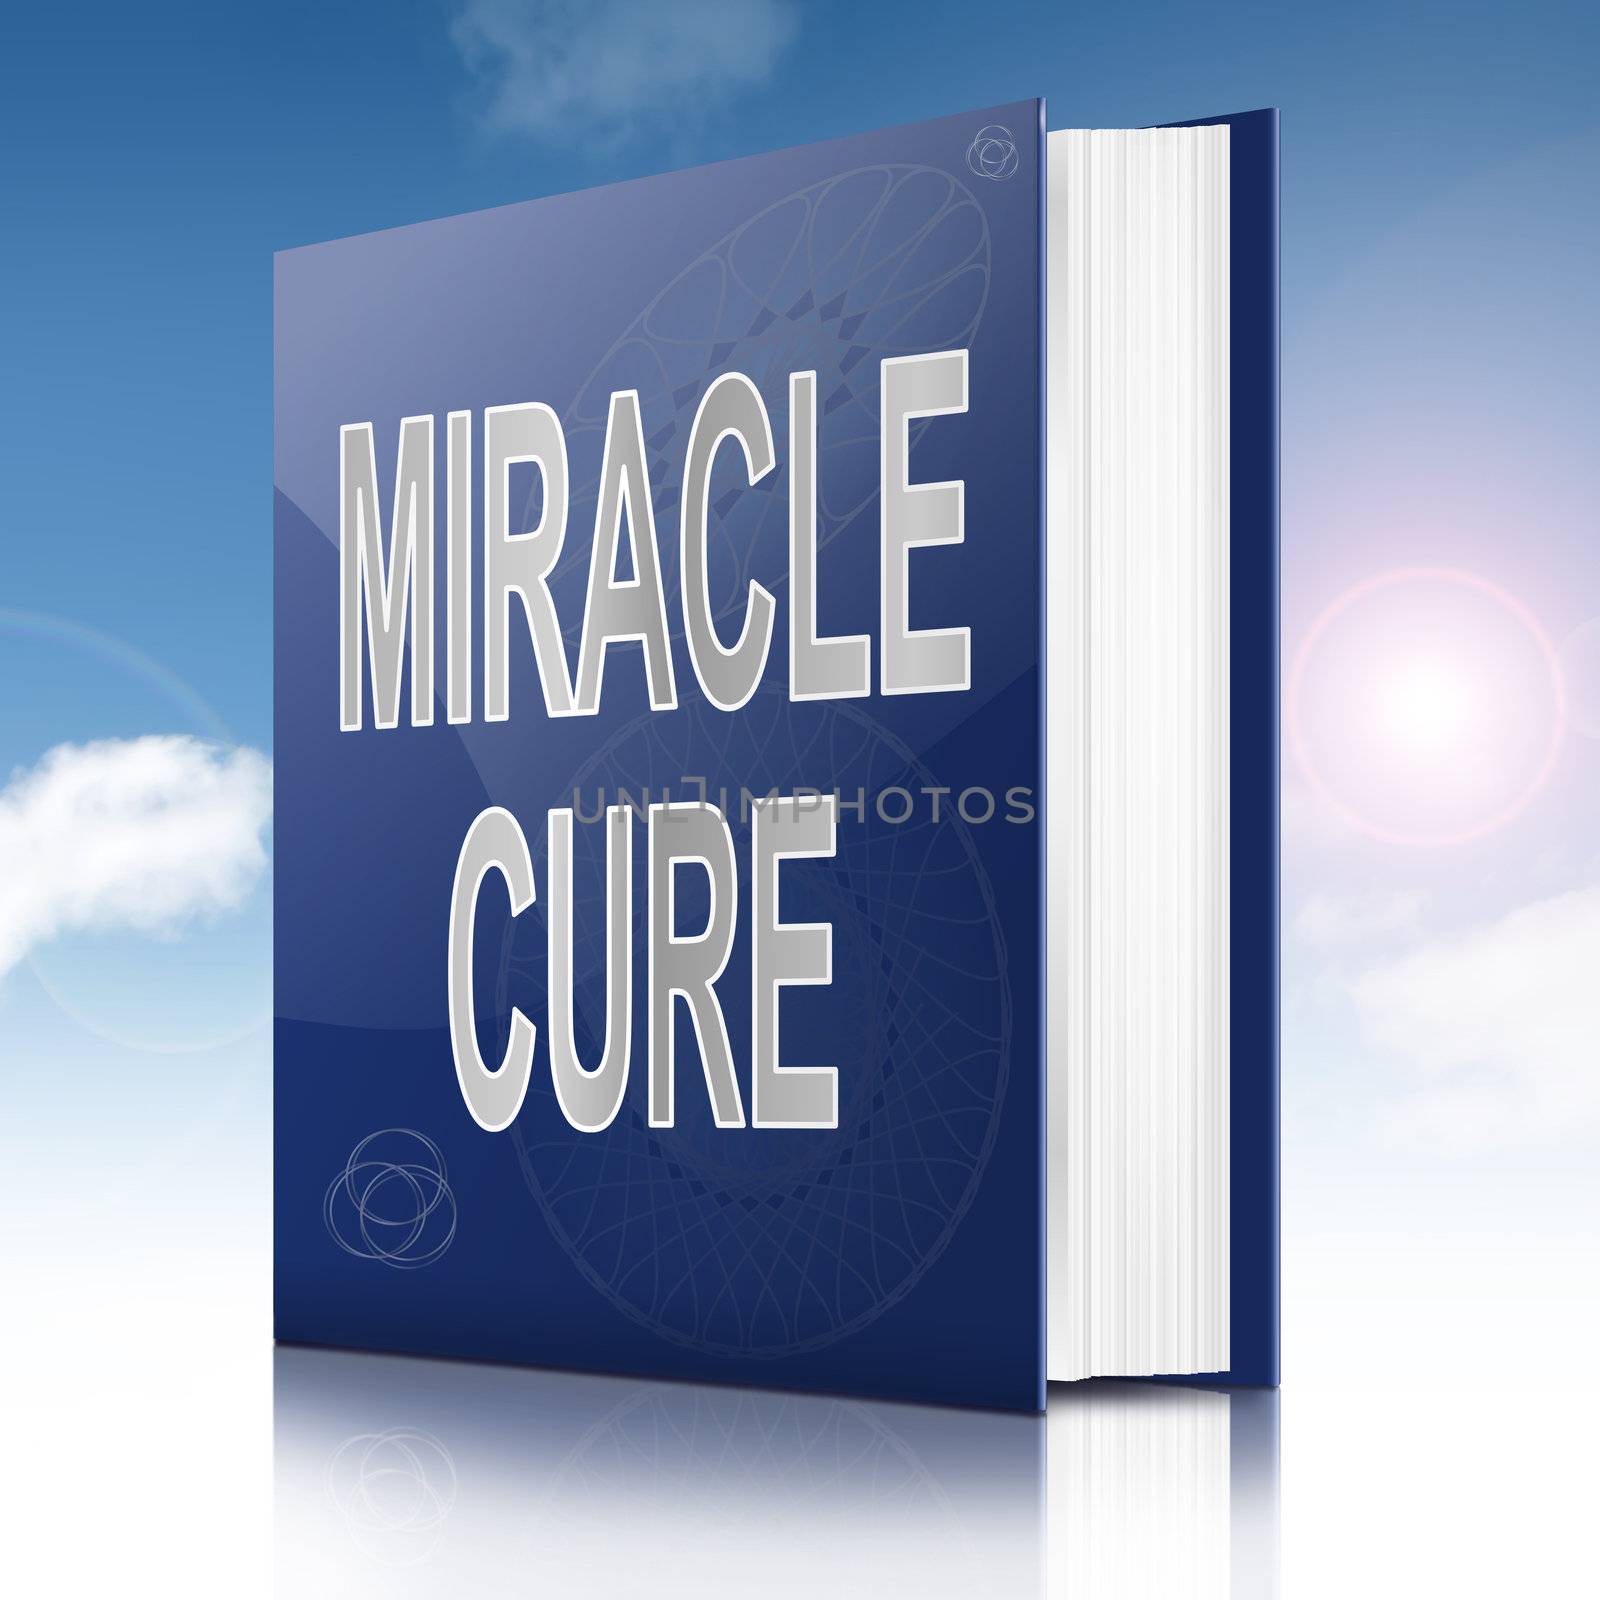 Miracle cure concept. by 72soul